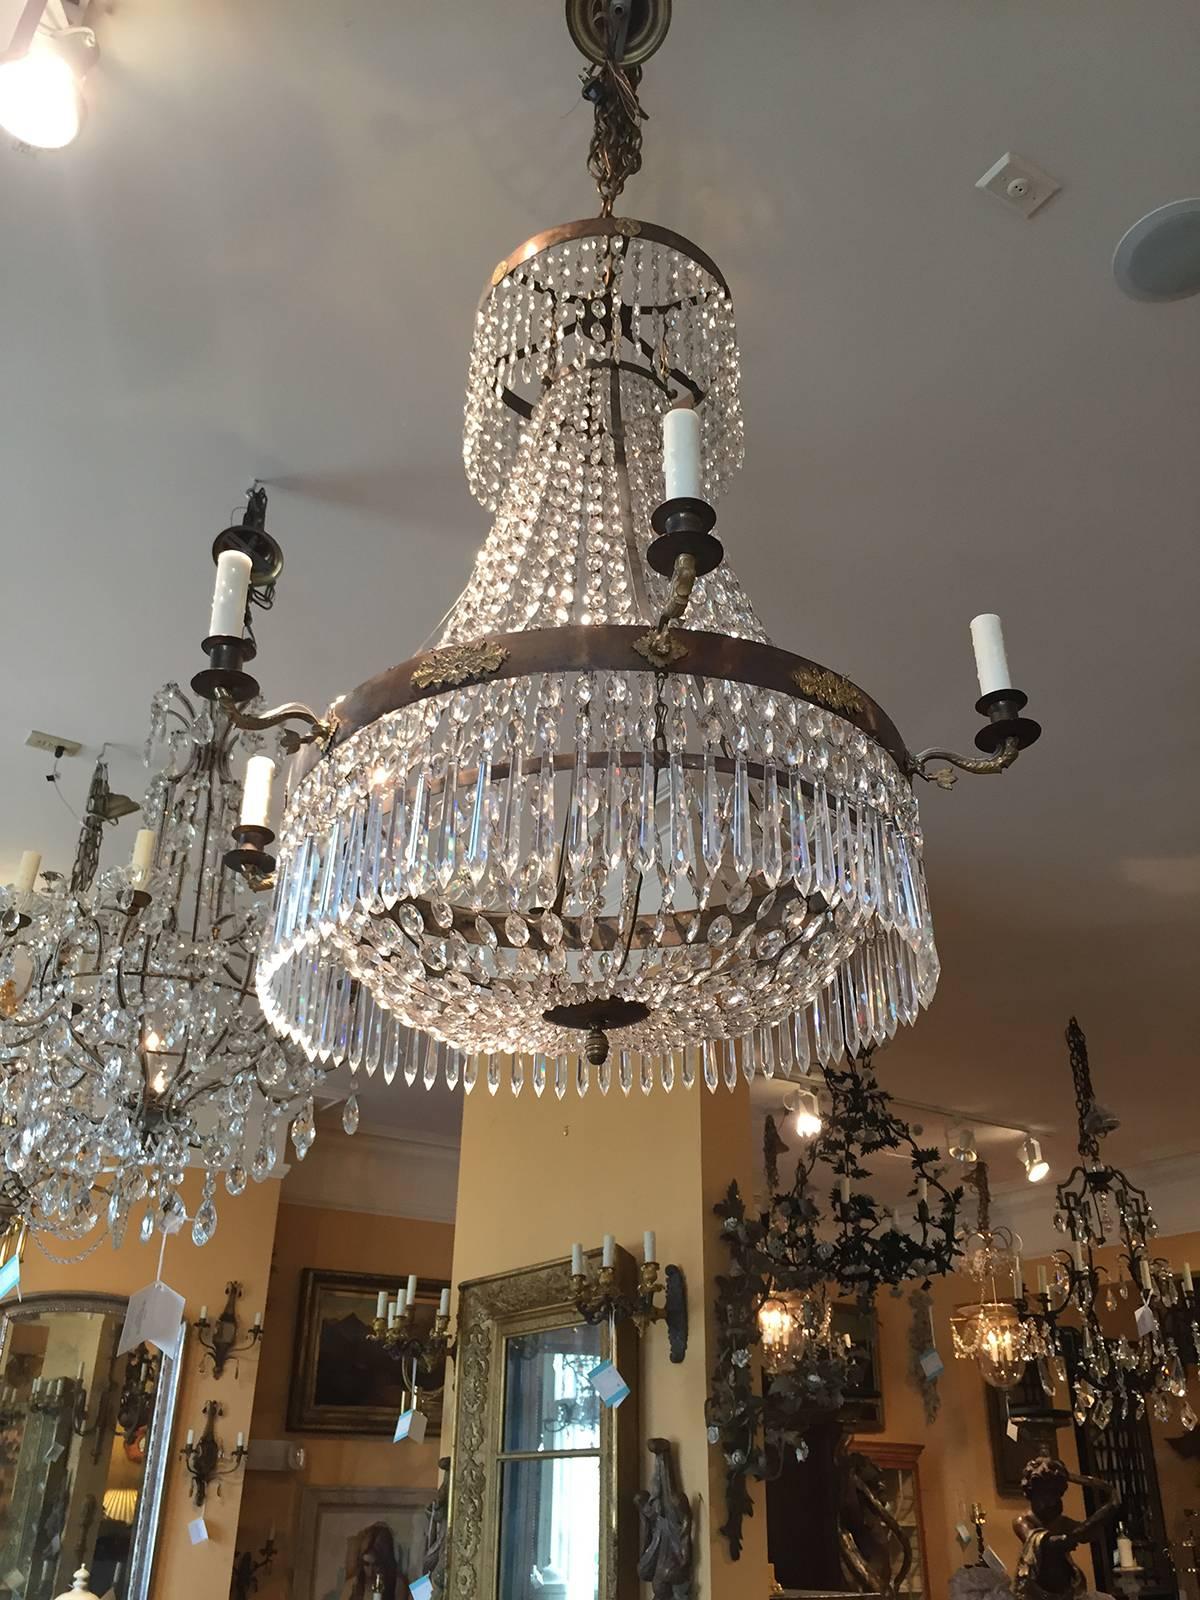 English Regency crystal and bronze chandelier, elegant form, featuring casting, candle arms are dolphin form with tails, Regency detailing, circa 1840.